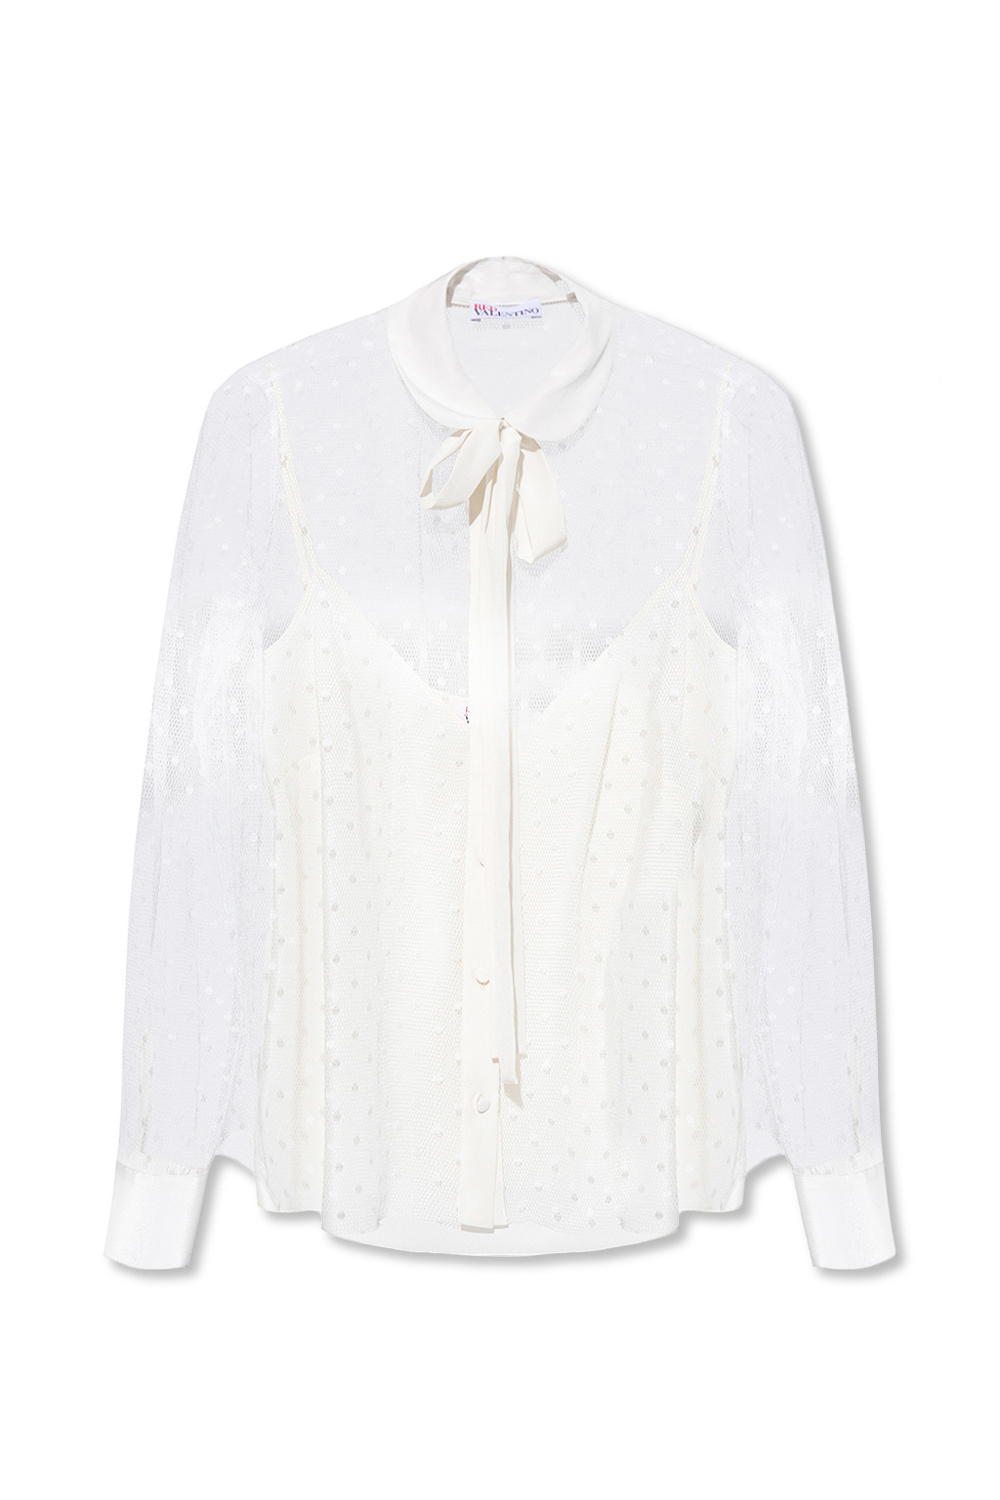 Red Valentino Tulle shirt